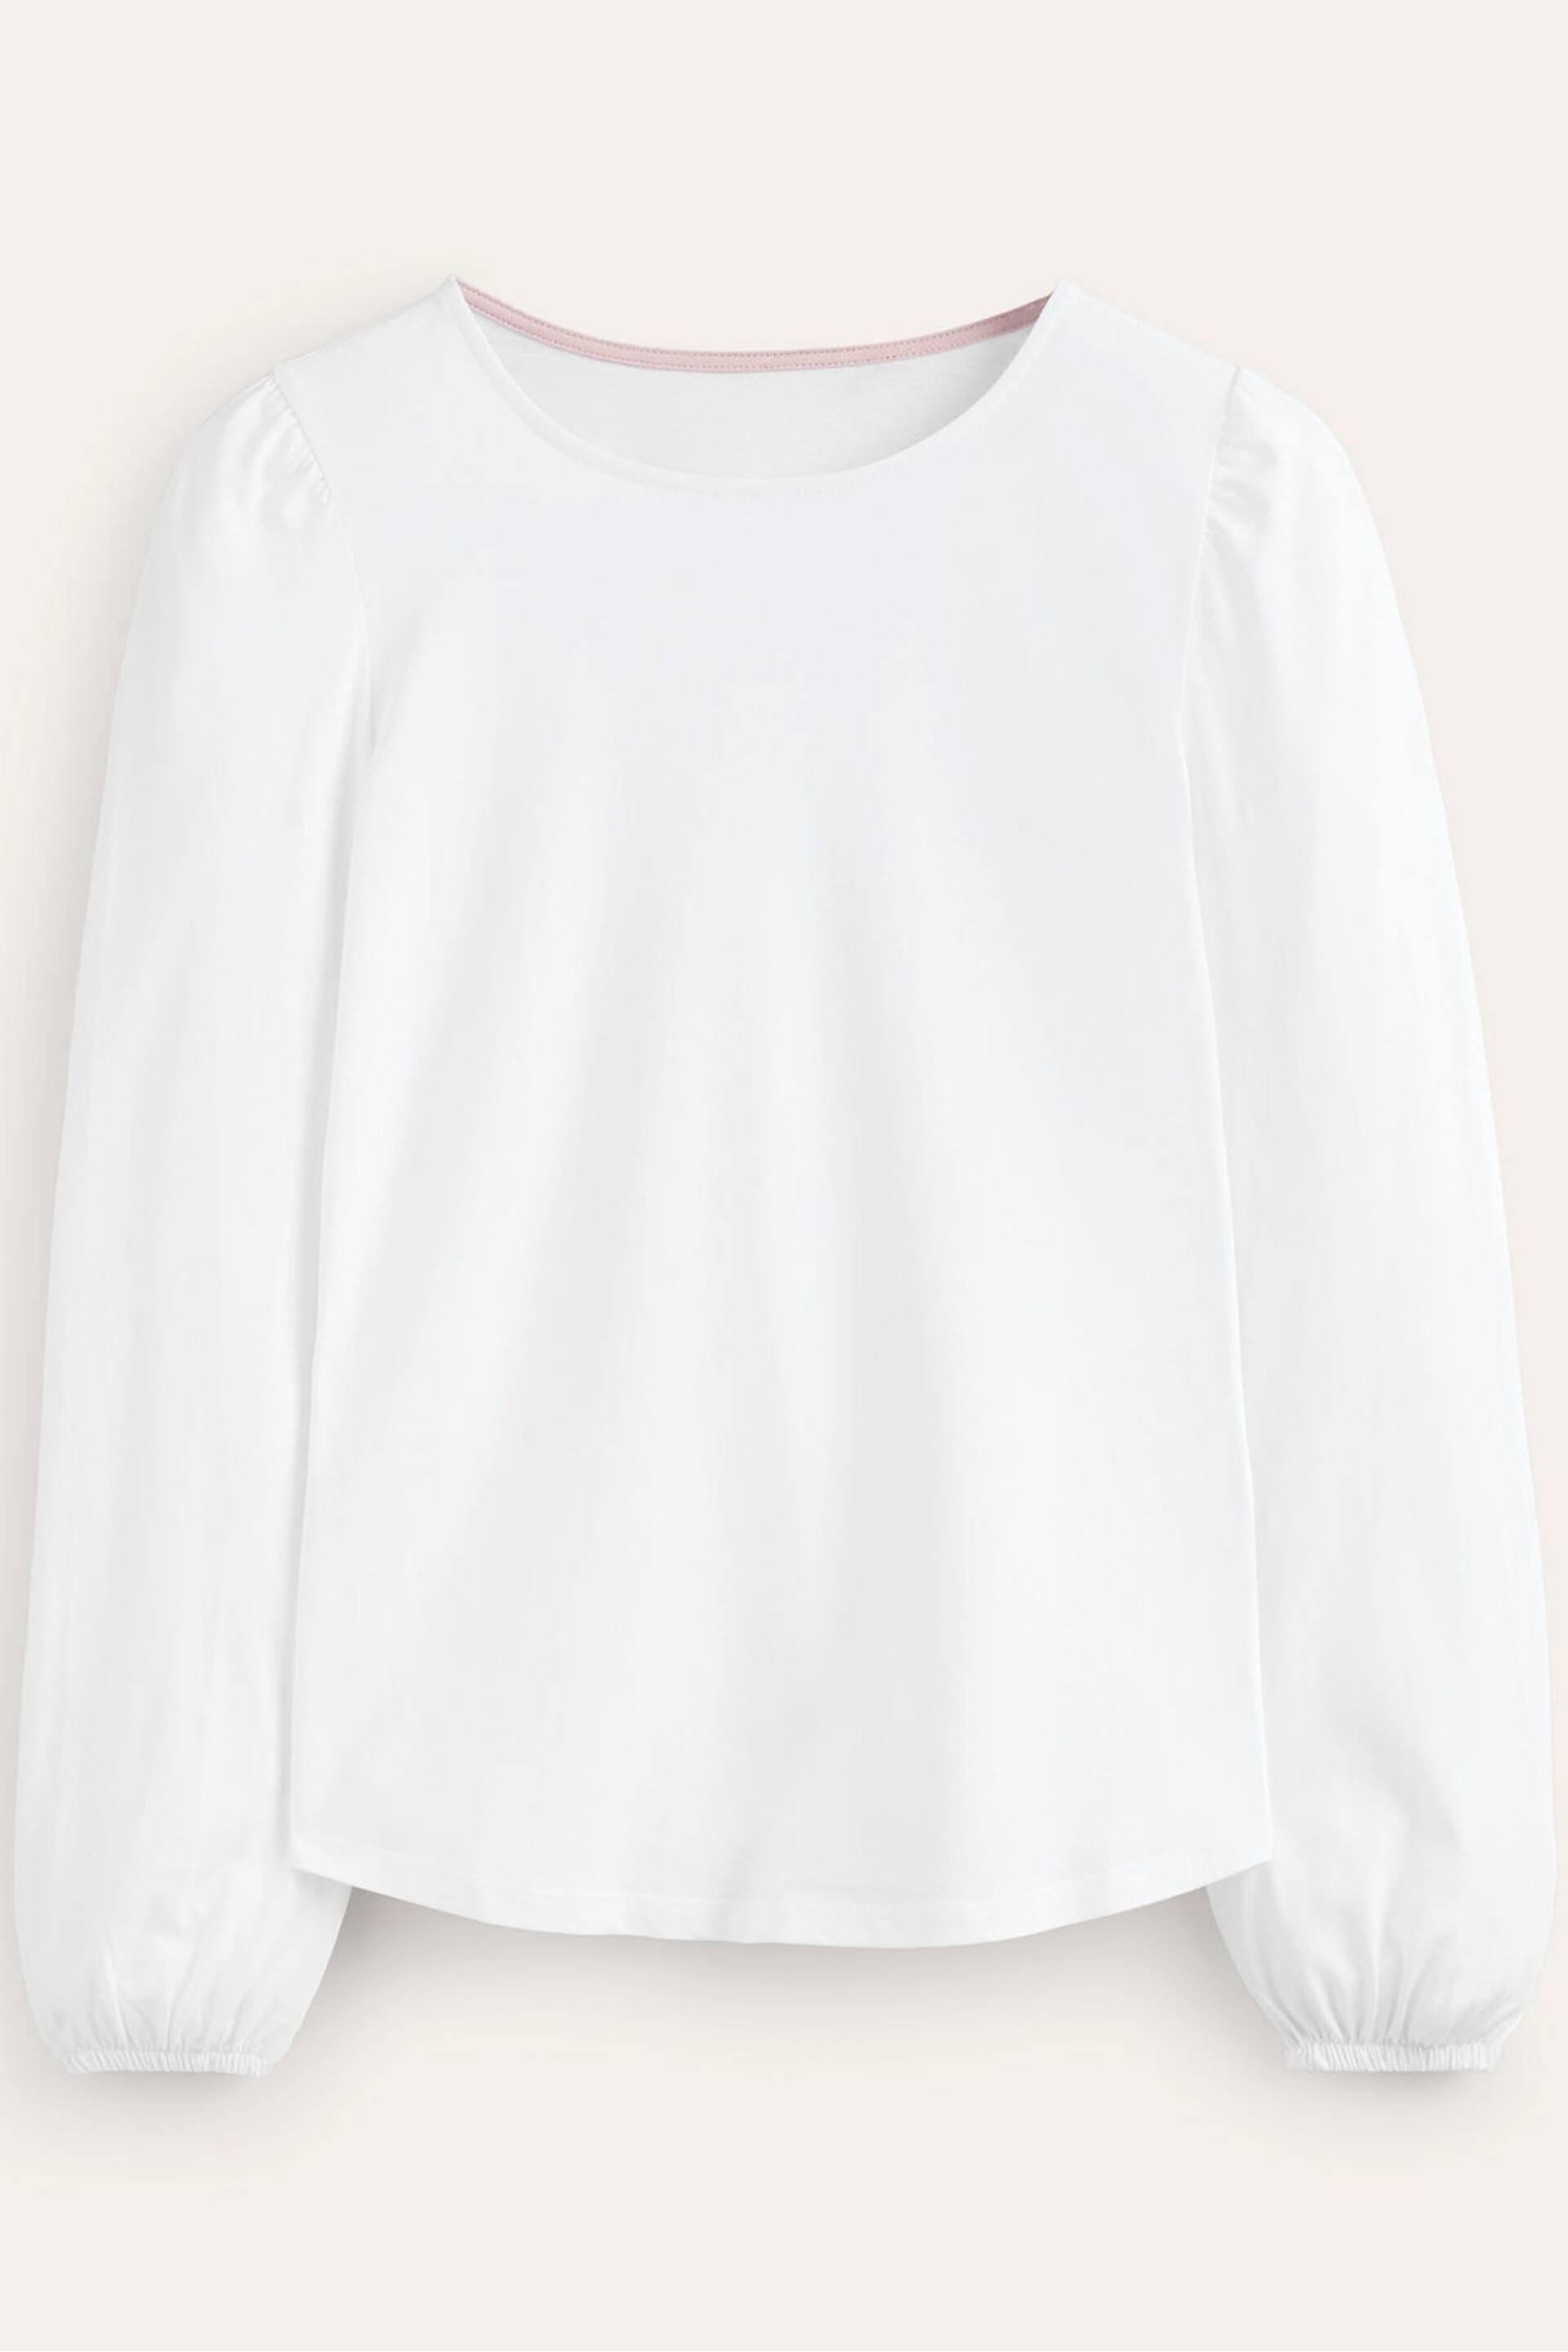 Boden White Supersoft Long Sleeve Top - Image 5 of 5